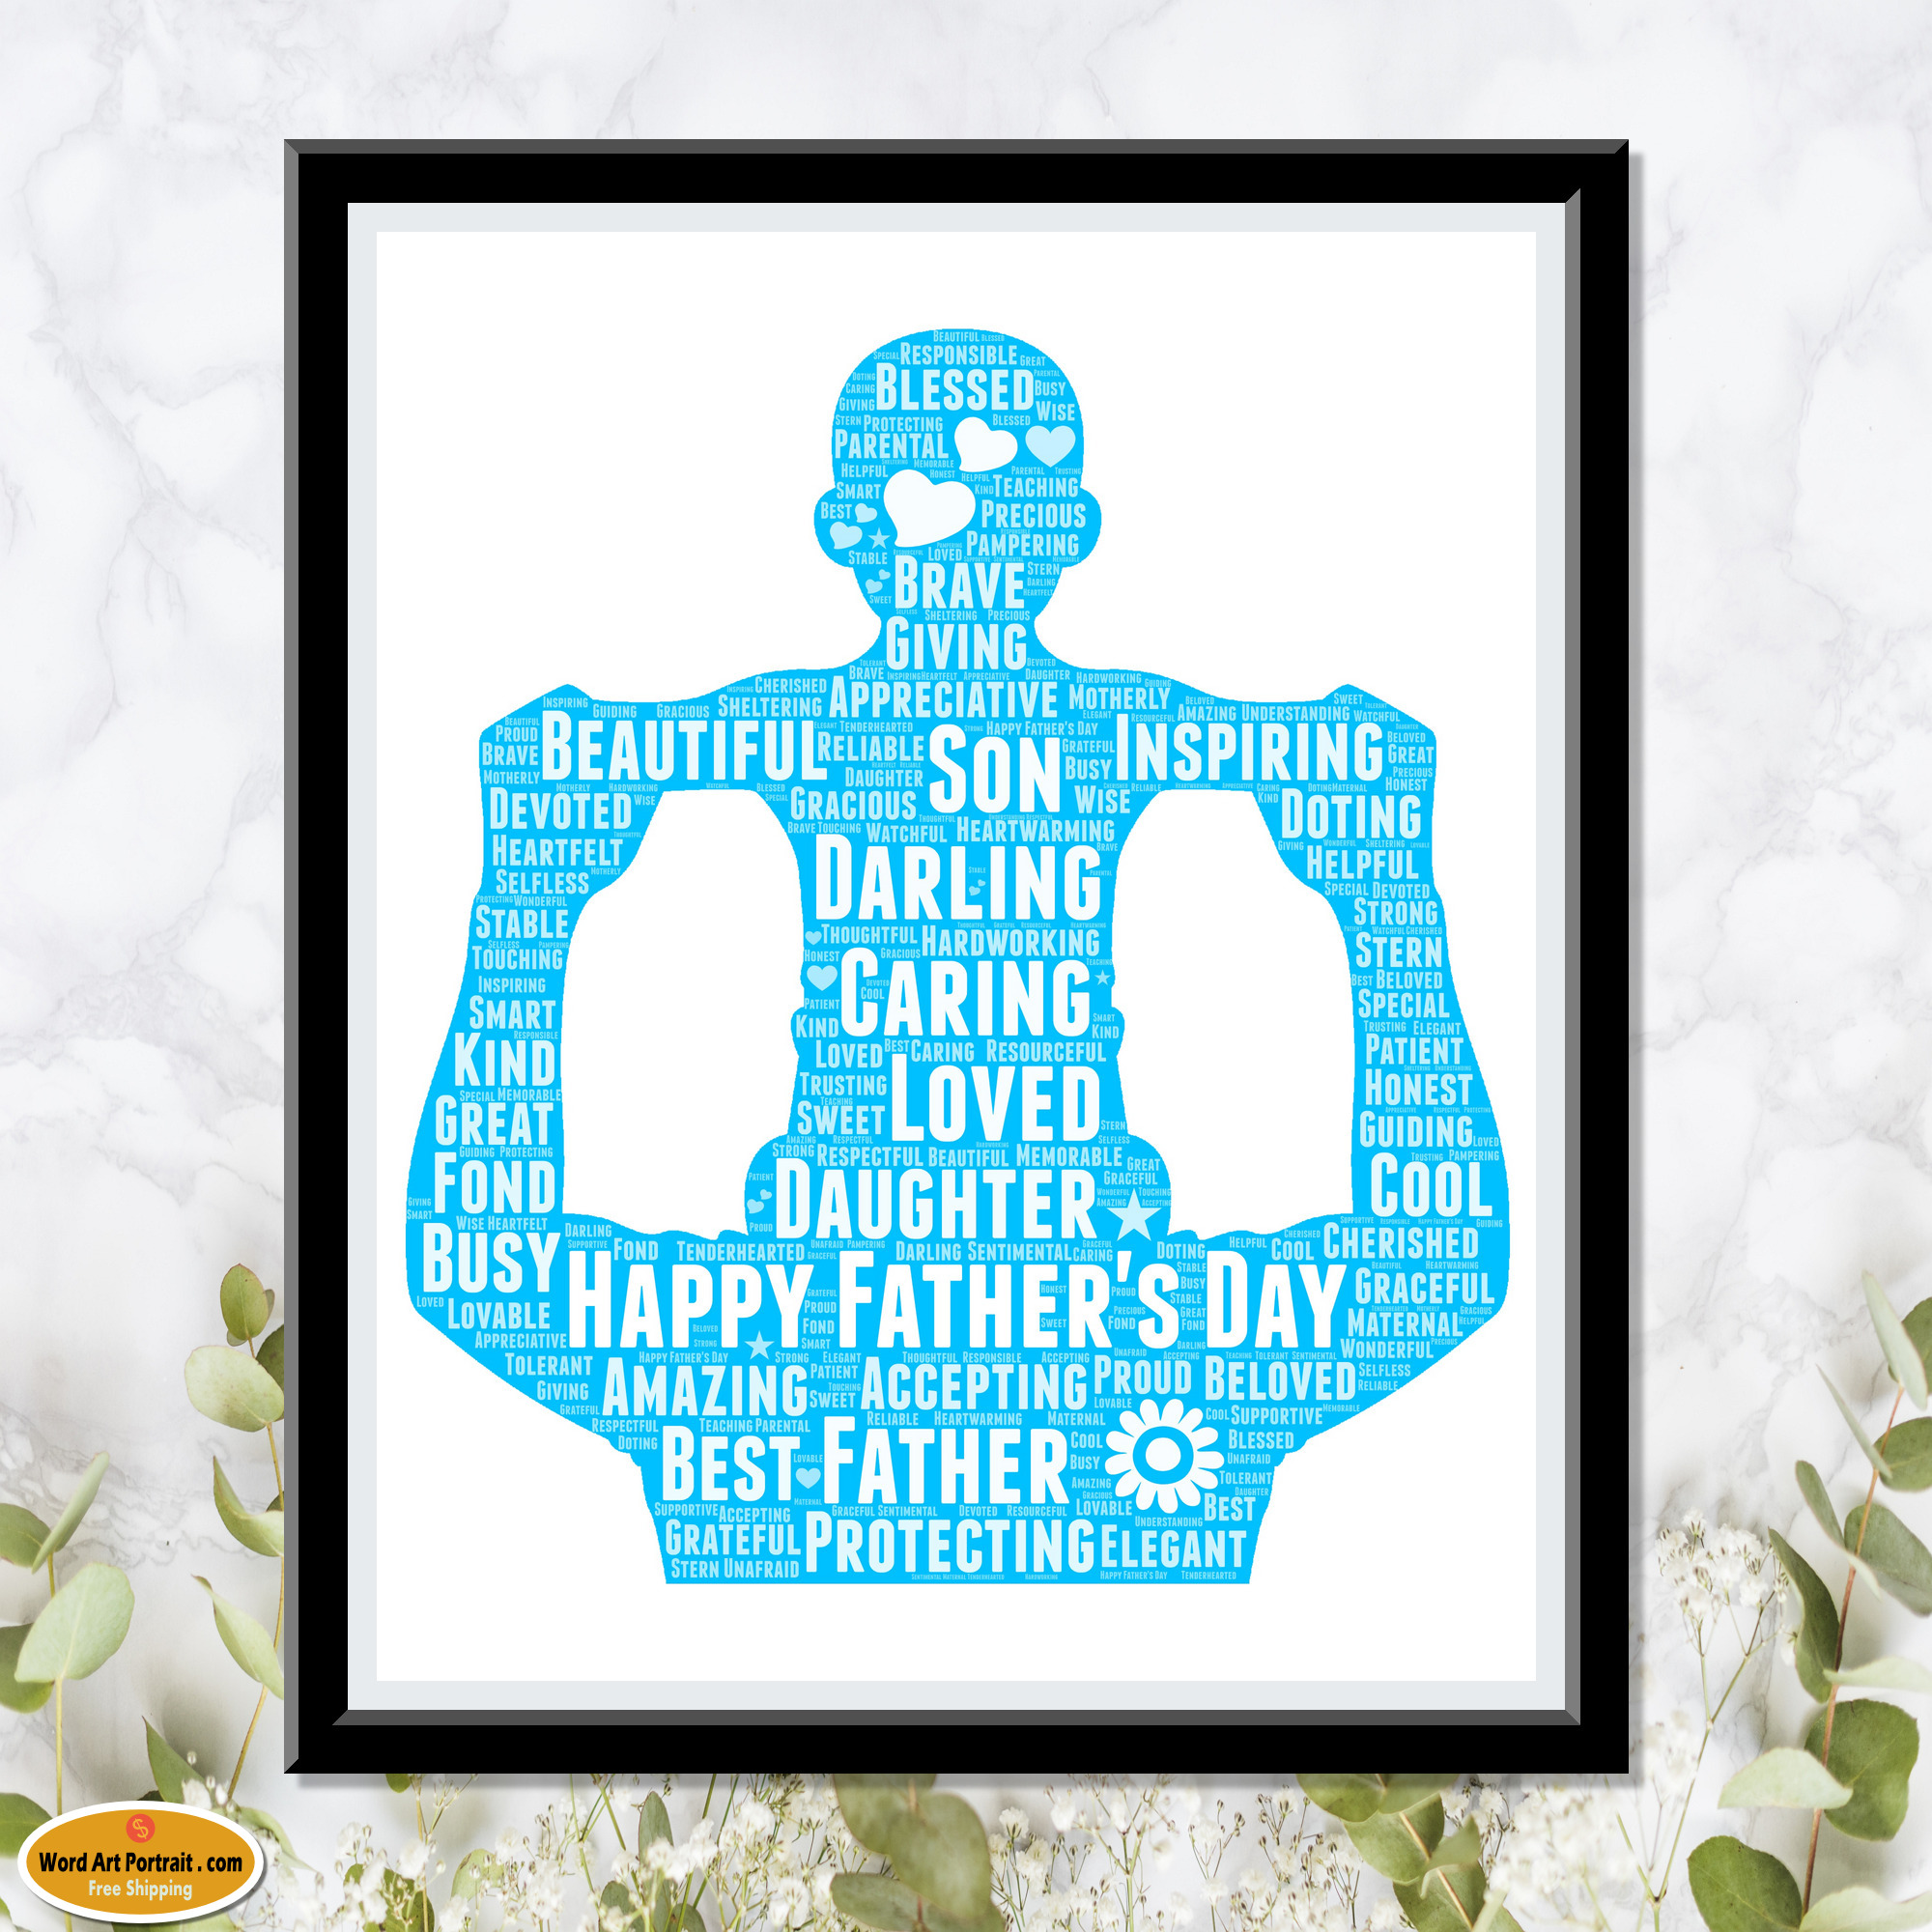 NEW GUITAR WORD ART PERSONALISED GIFT FOR HIM ON FATHER'S DAY DAD DADDY COOL 